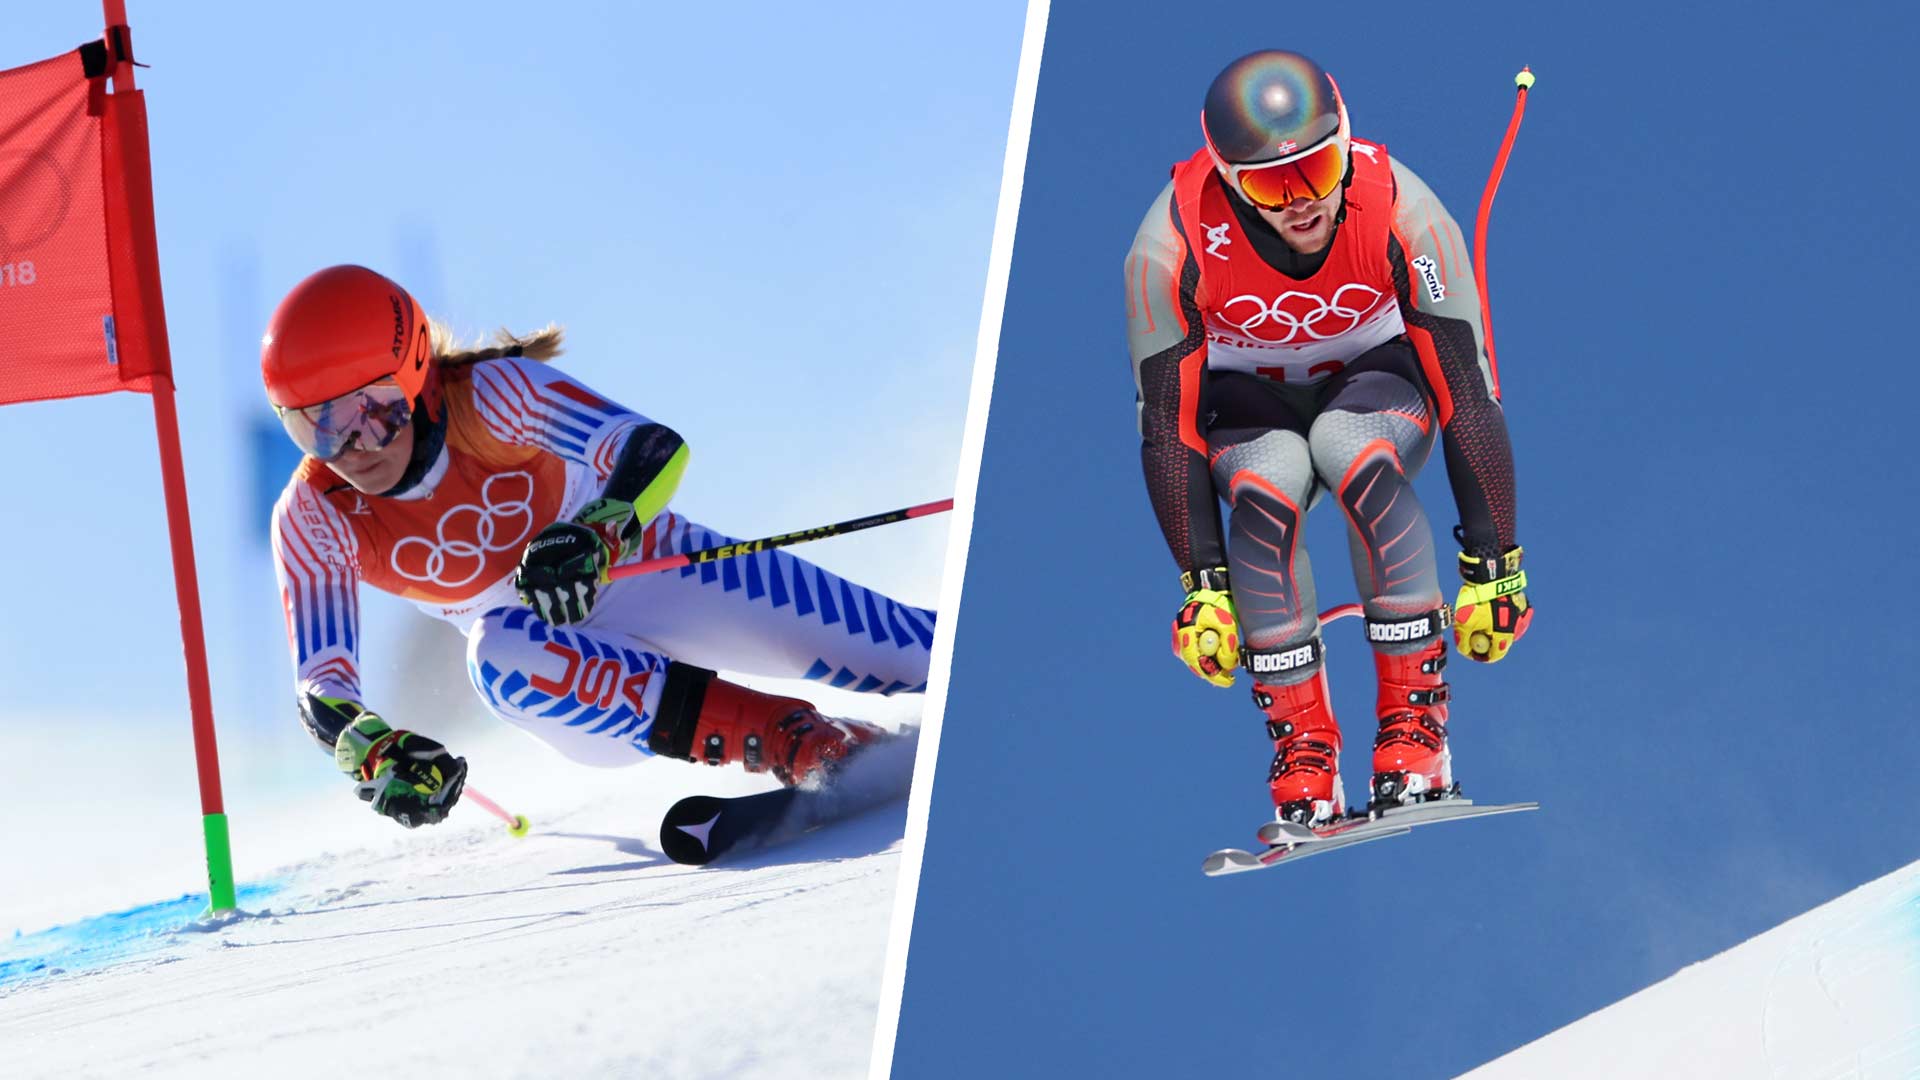 LIVE UPDATES Shiffrin in GS, Kilde in mens downhill highlight packed day of skiing